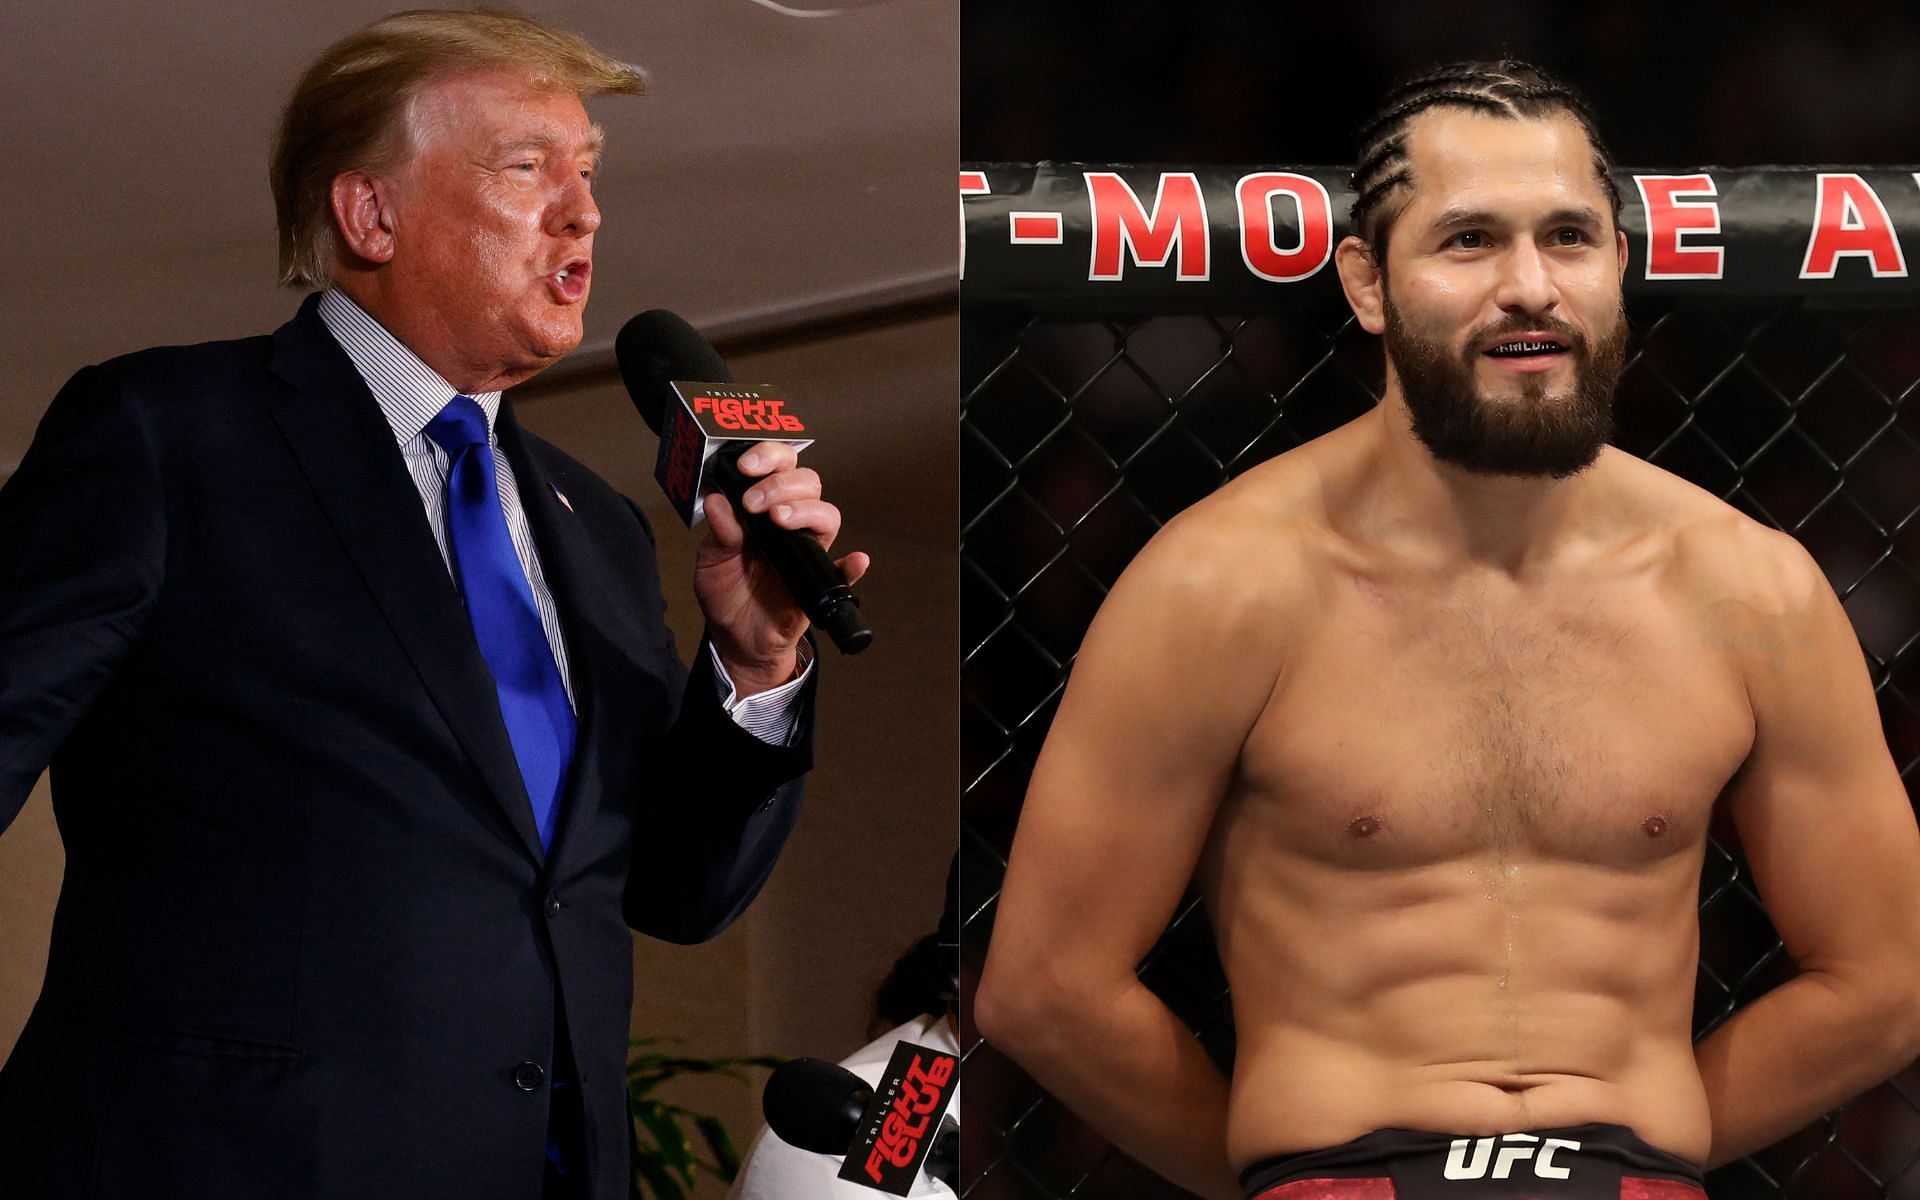 Donald Trump (left) and Jorge Masvidal (right) (Image credits Getty Images)